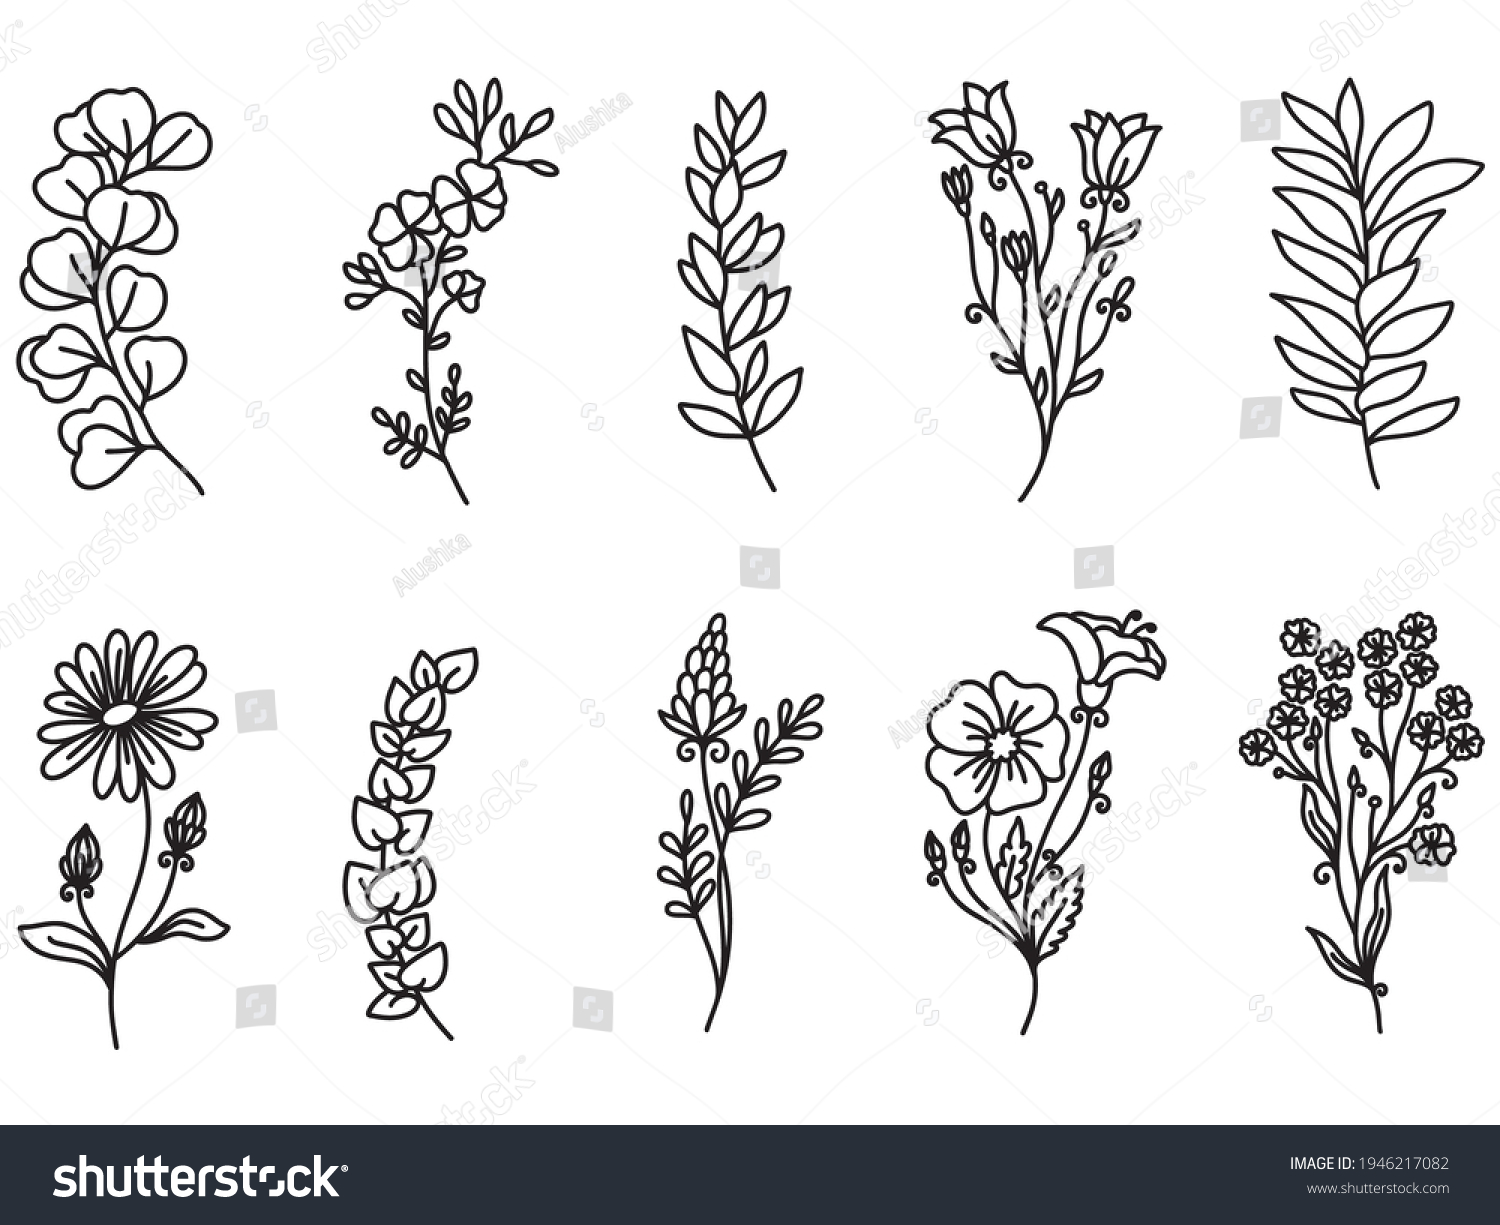 SVG of Botanical Floral Wildflowers Clipart. Summer Flowers and Plants. Vector illustration. svg